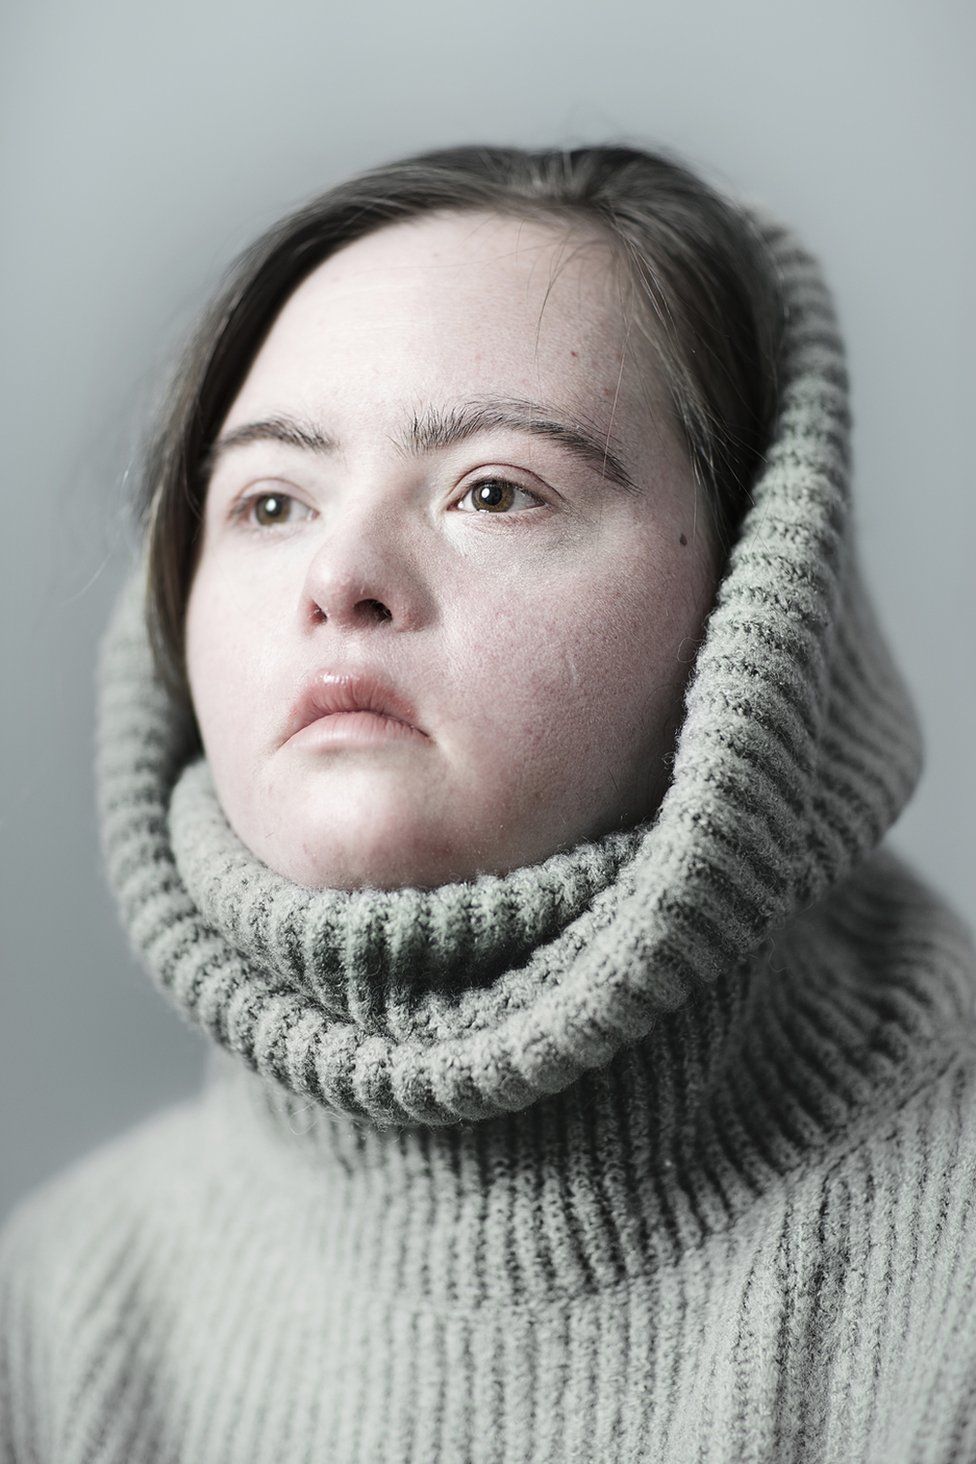 This series is part of the Radical Beauty project, an international photography project which aims to give people with Down syndrome their rightful place in the visual arts.